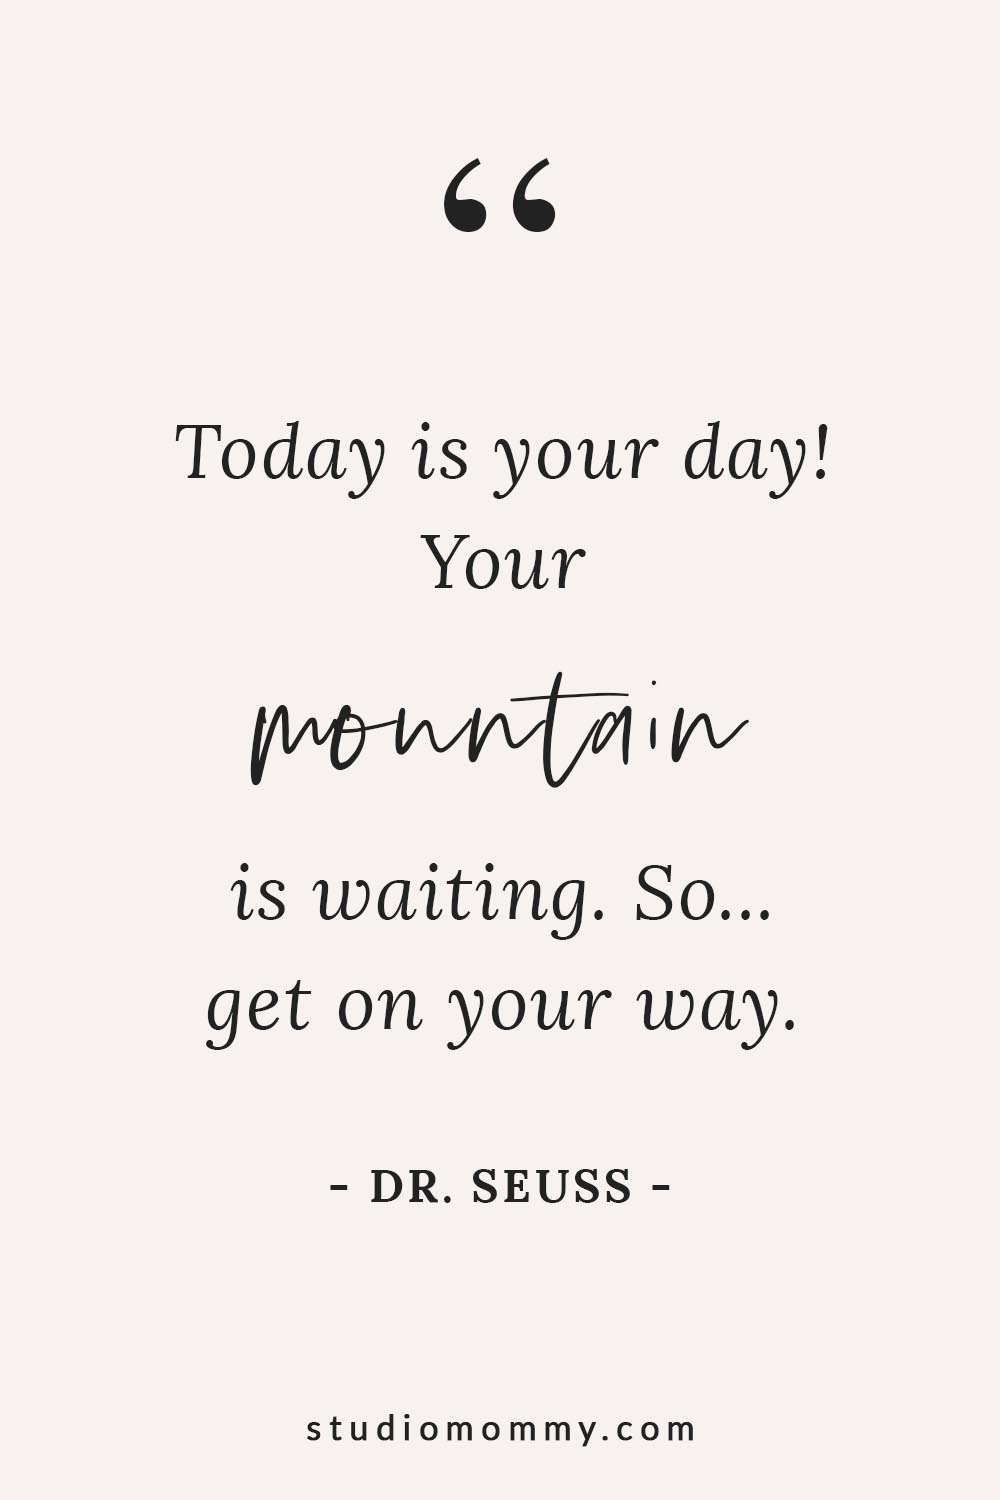 Today is your day! Your mountain is waiting so get on your way. - Dr. Seuss @studiomommy